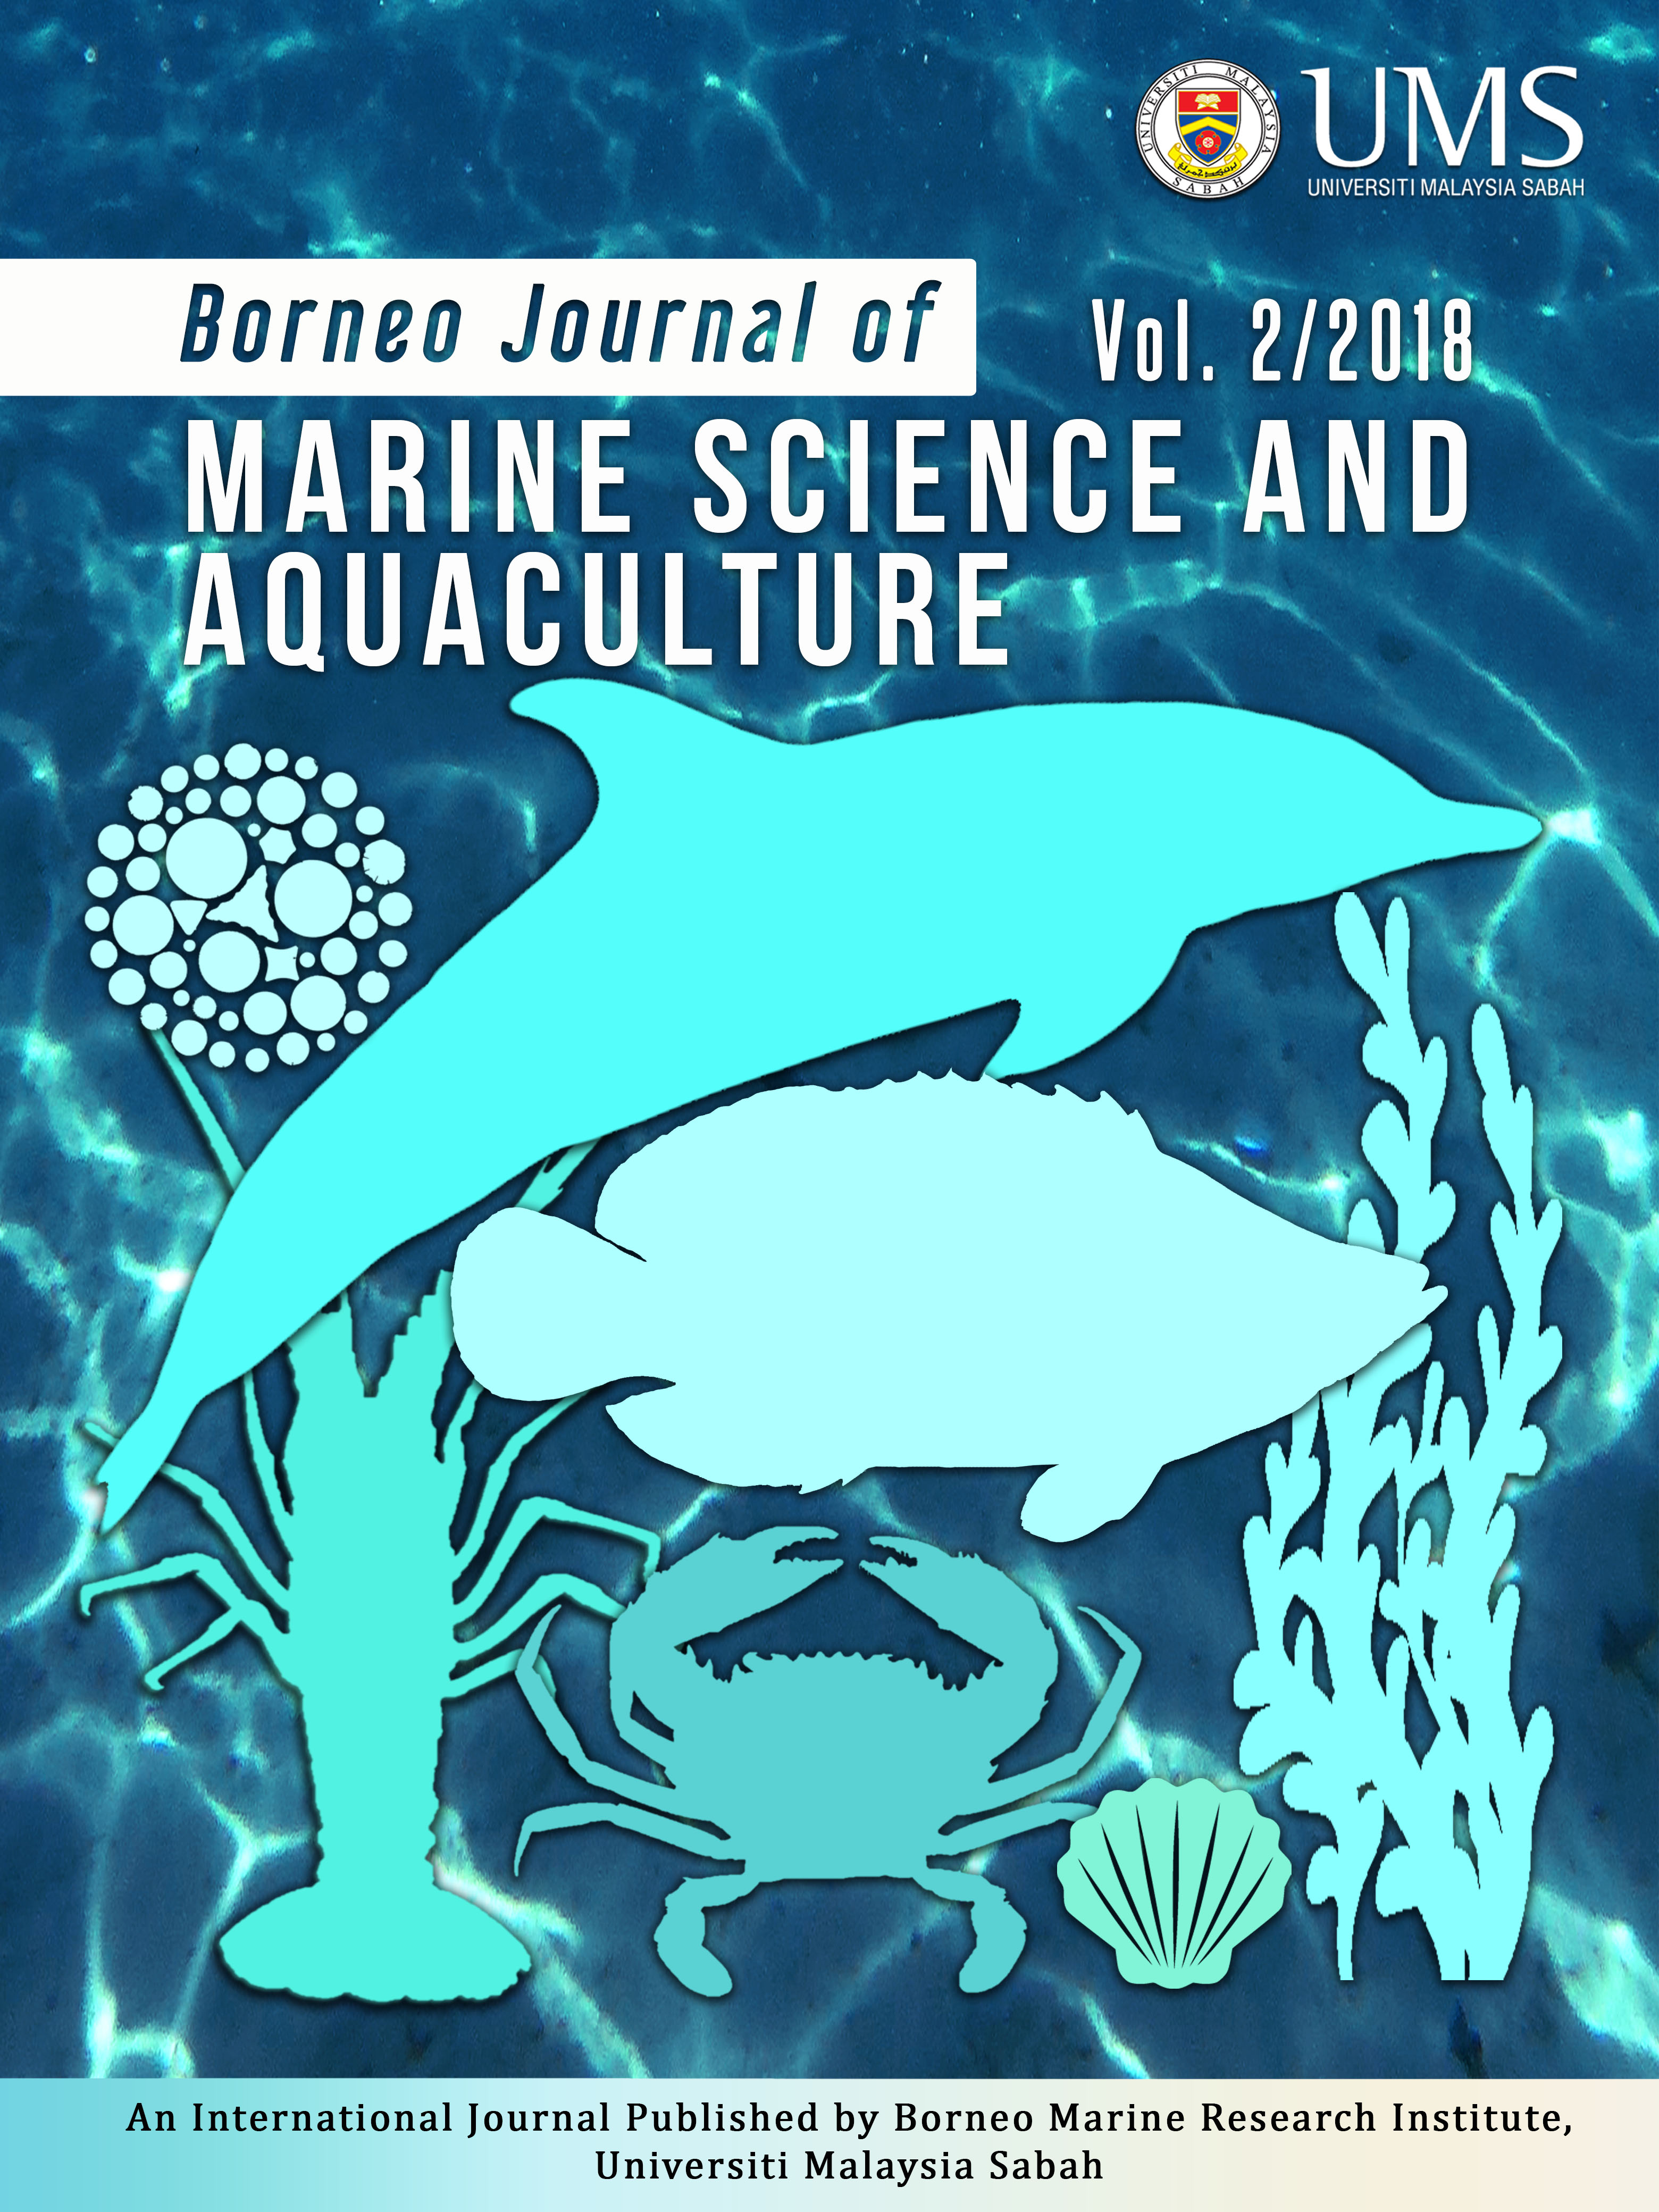 					View Vol. 2 (2018): Borneo Journal of Marine Science and Aquaculture Vol. 2/2018
				